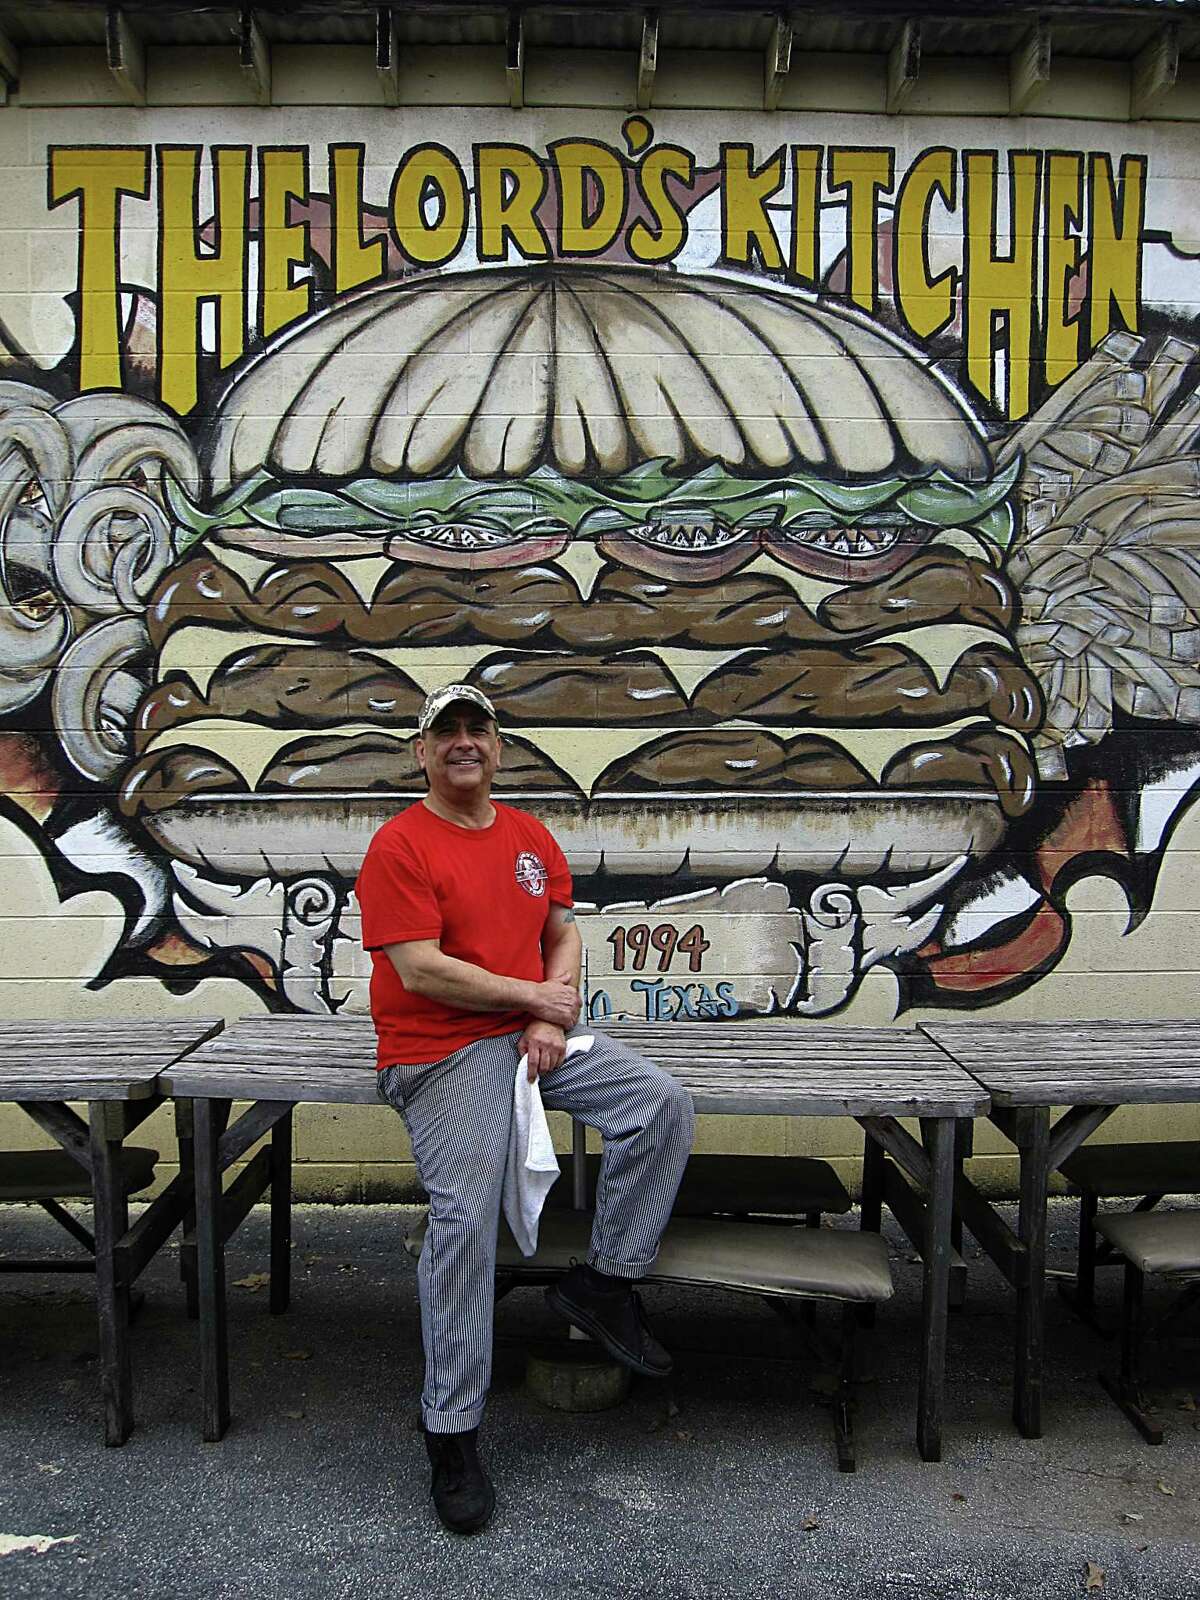 Looking for a place to stop for a juicy burger along Interstate 35. Ray Perez opened The Lord's Kitchen on Seguin Street in 1994.